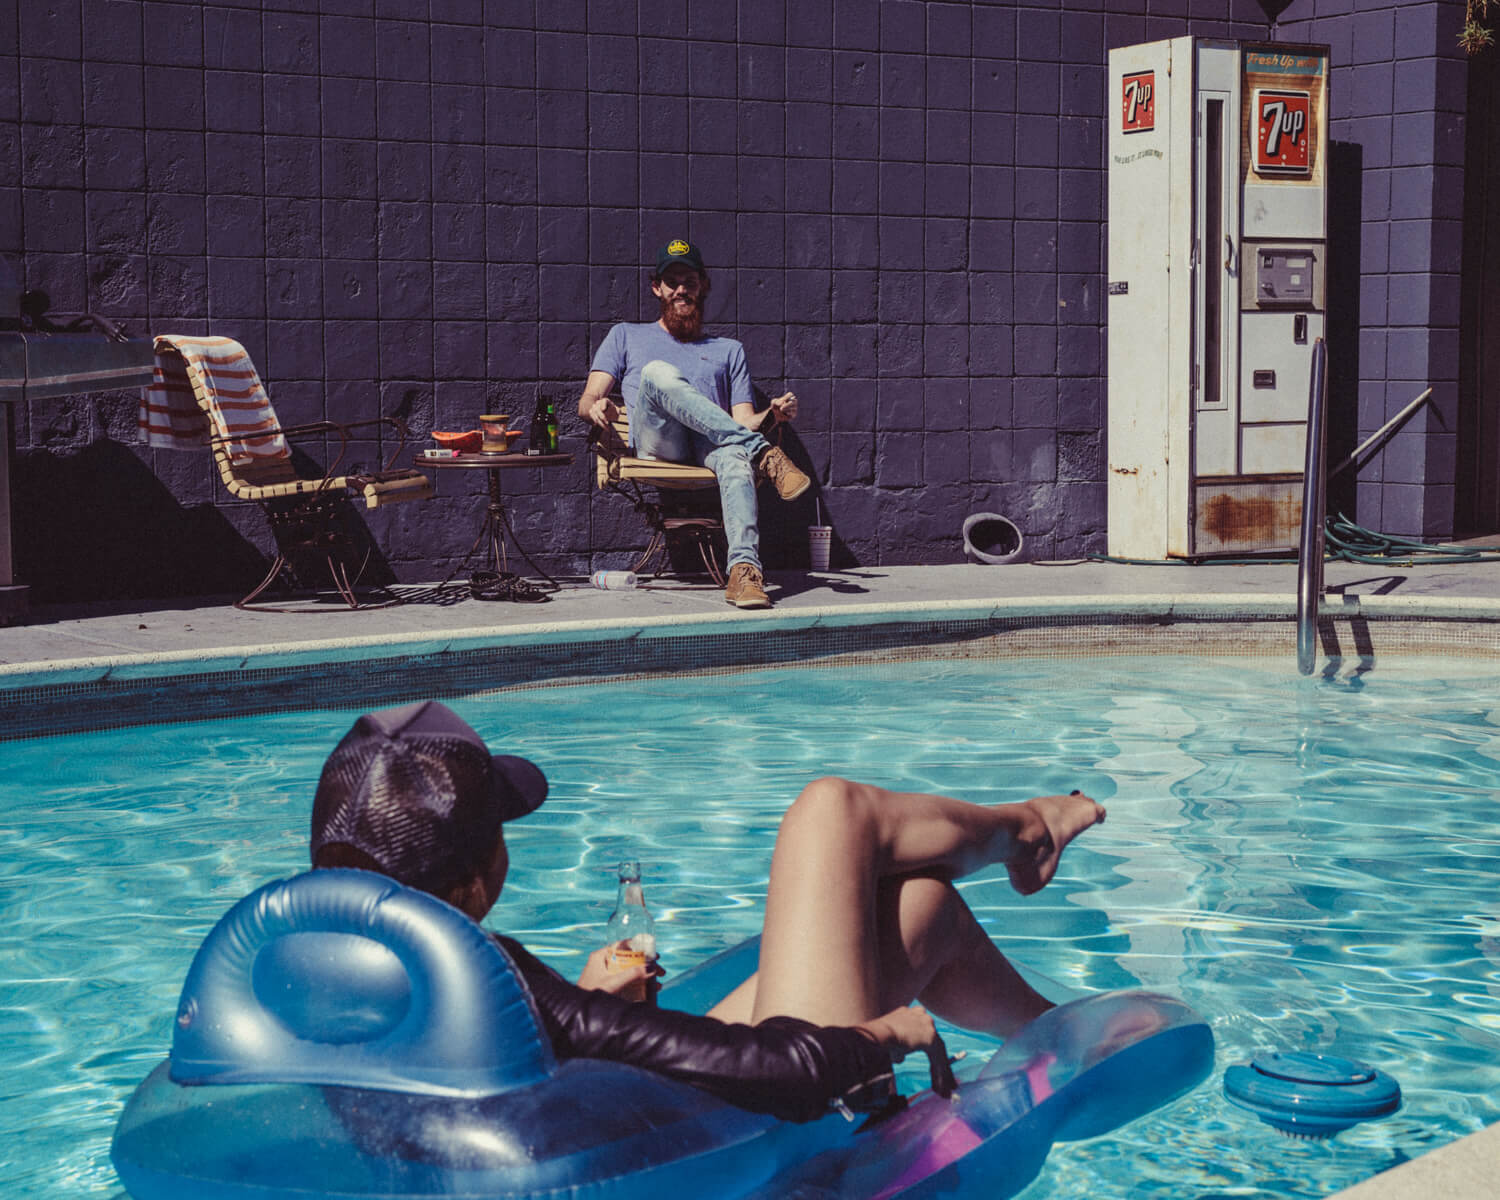 Hipster on inflated lounger, by lifestyle photographer Tim Cole